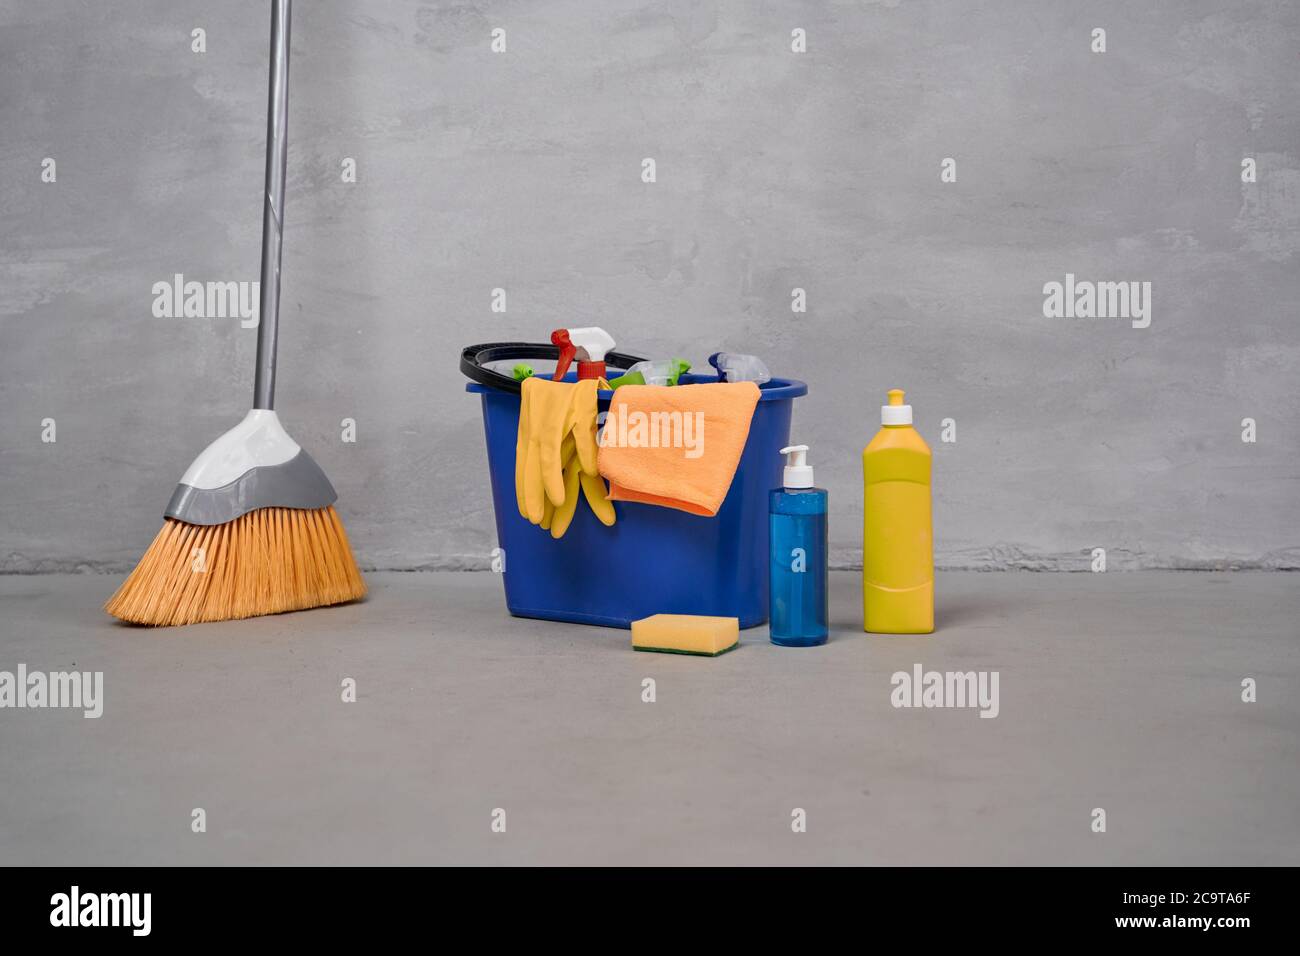 https://c8.alamy.com/comp/2C9TA6F/cleaning-supplies-broom-and-plastic-bucket-or-basket-with-cleaning-products-bottles-with-detergents-standing-on-the-floor-against-grey-wall-housework-cleaning-housekeeping-concept-disinfection-2C9TA6F.jpg